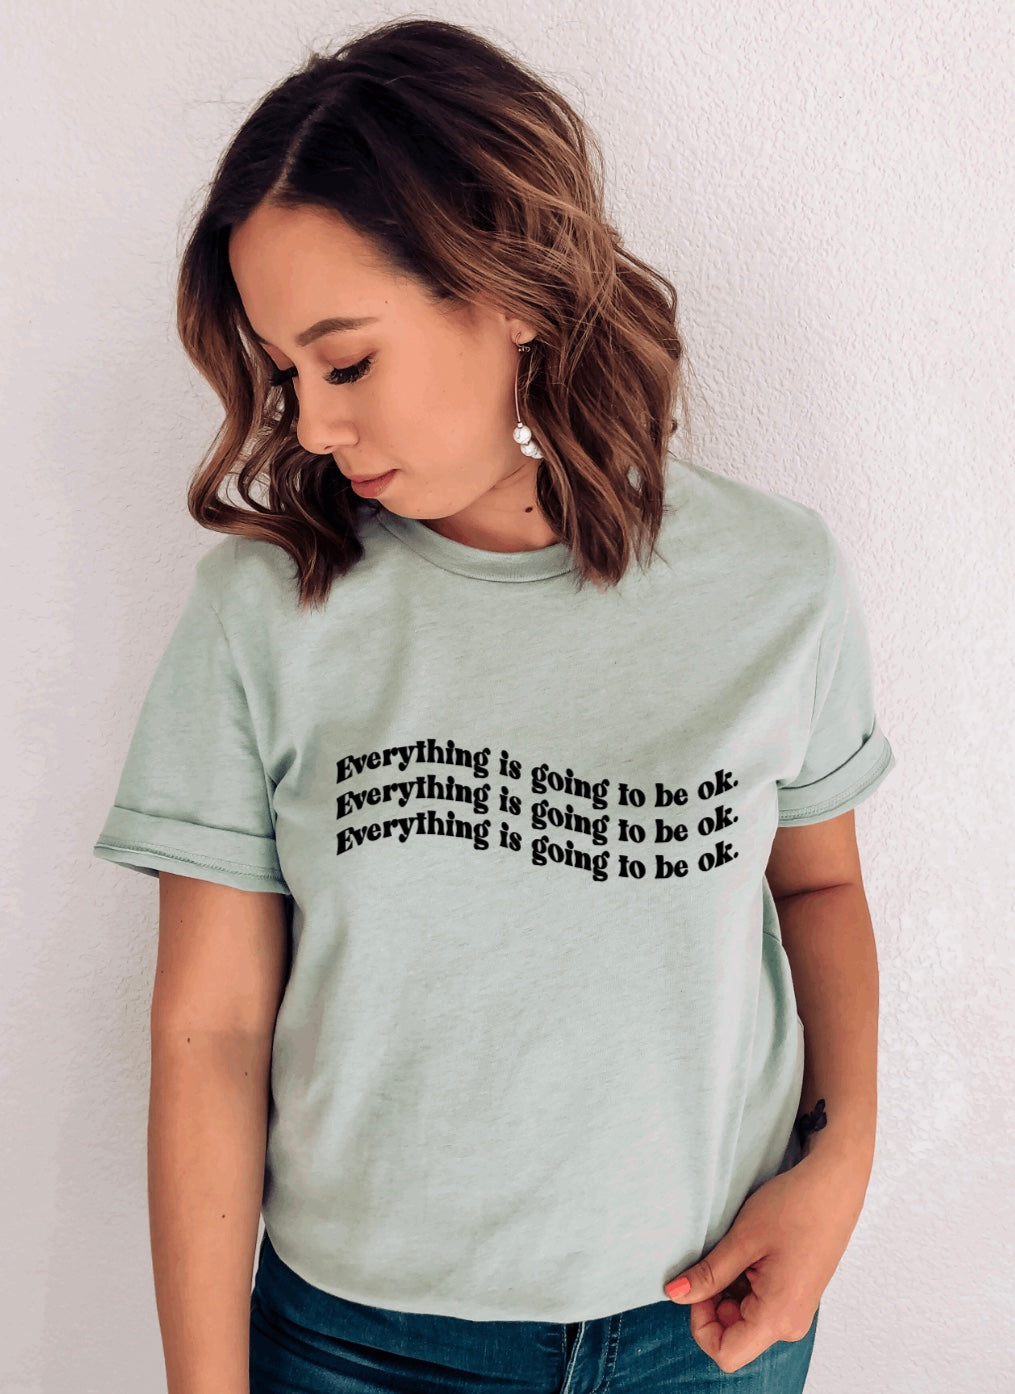 Everything is going to be ok t-shirt 